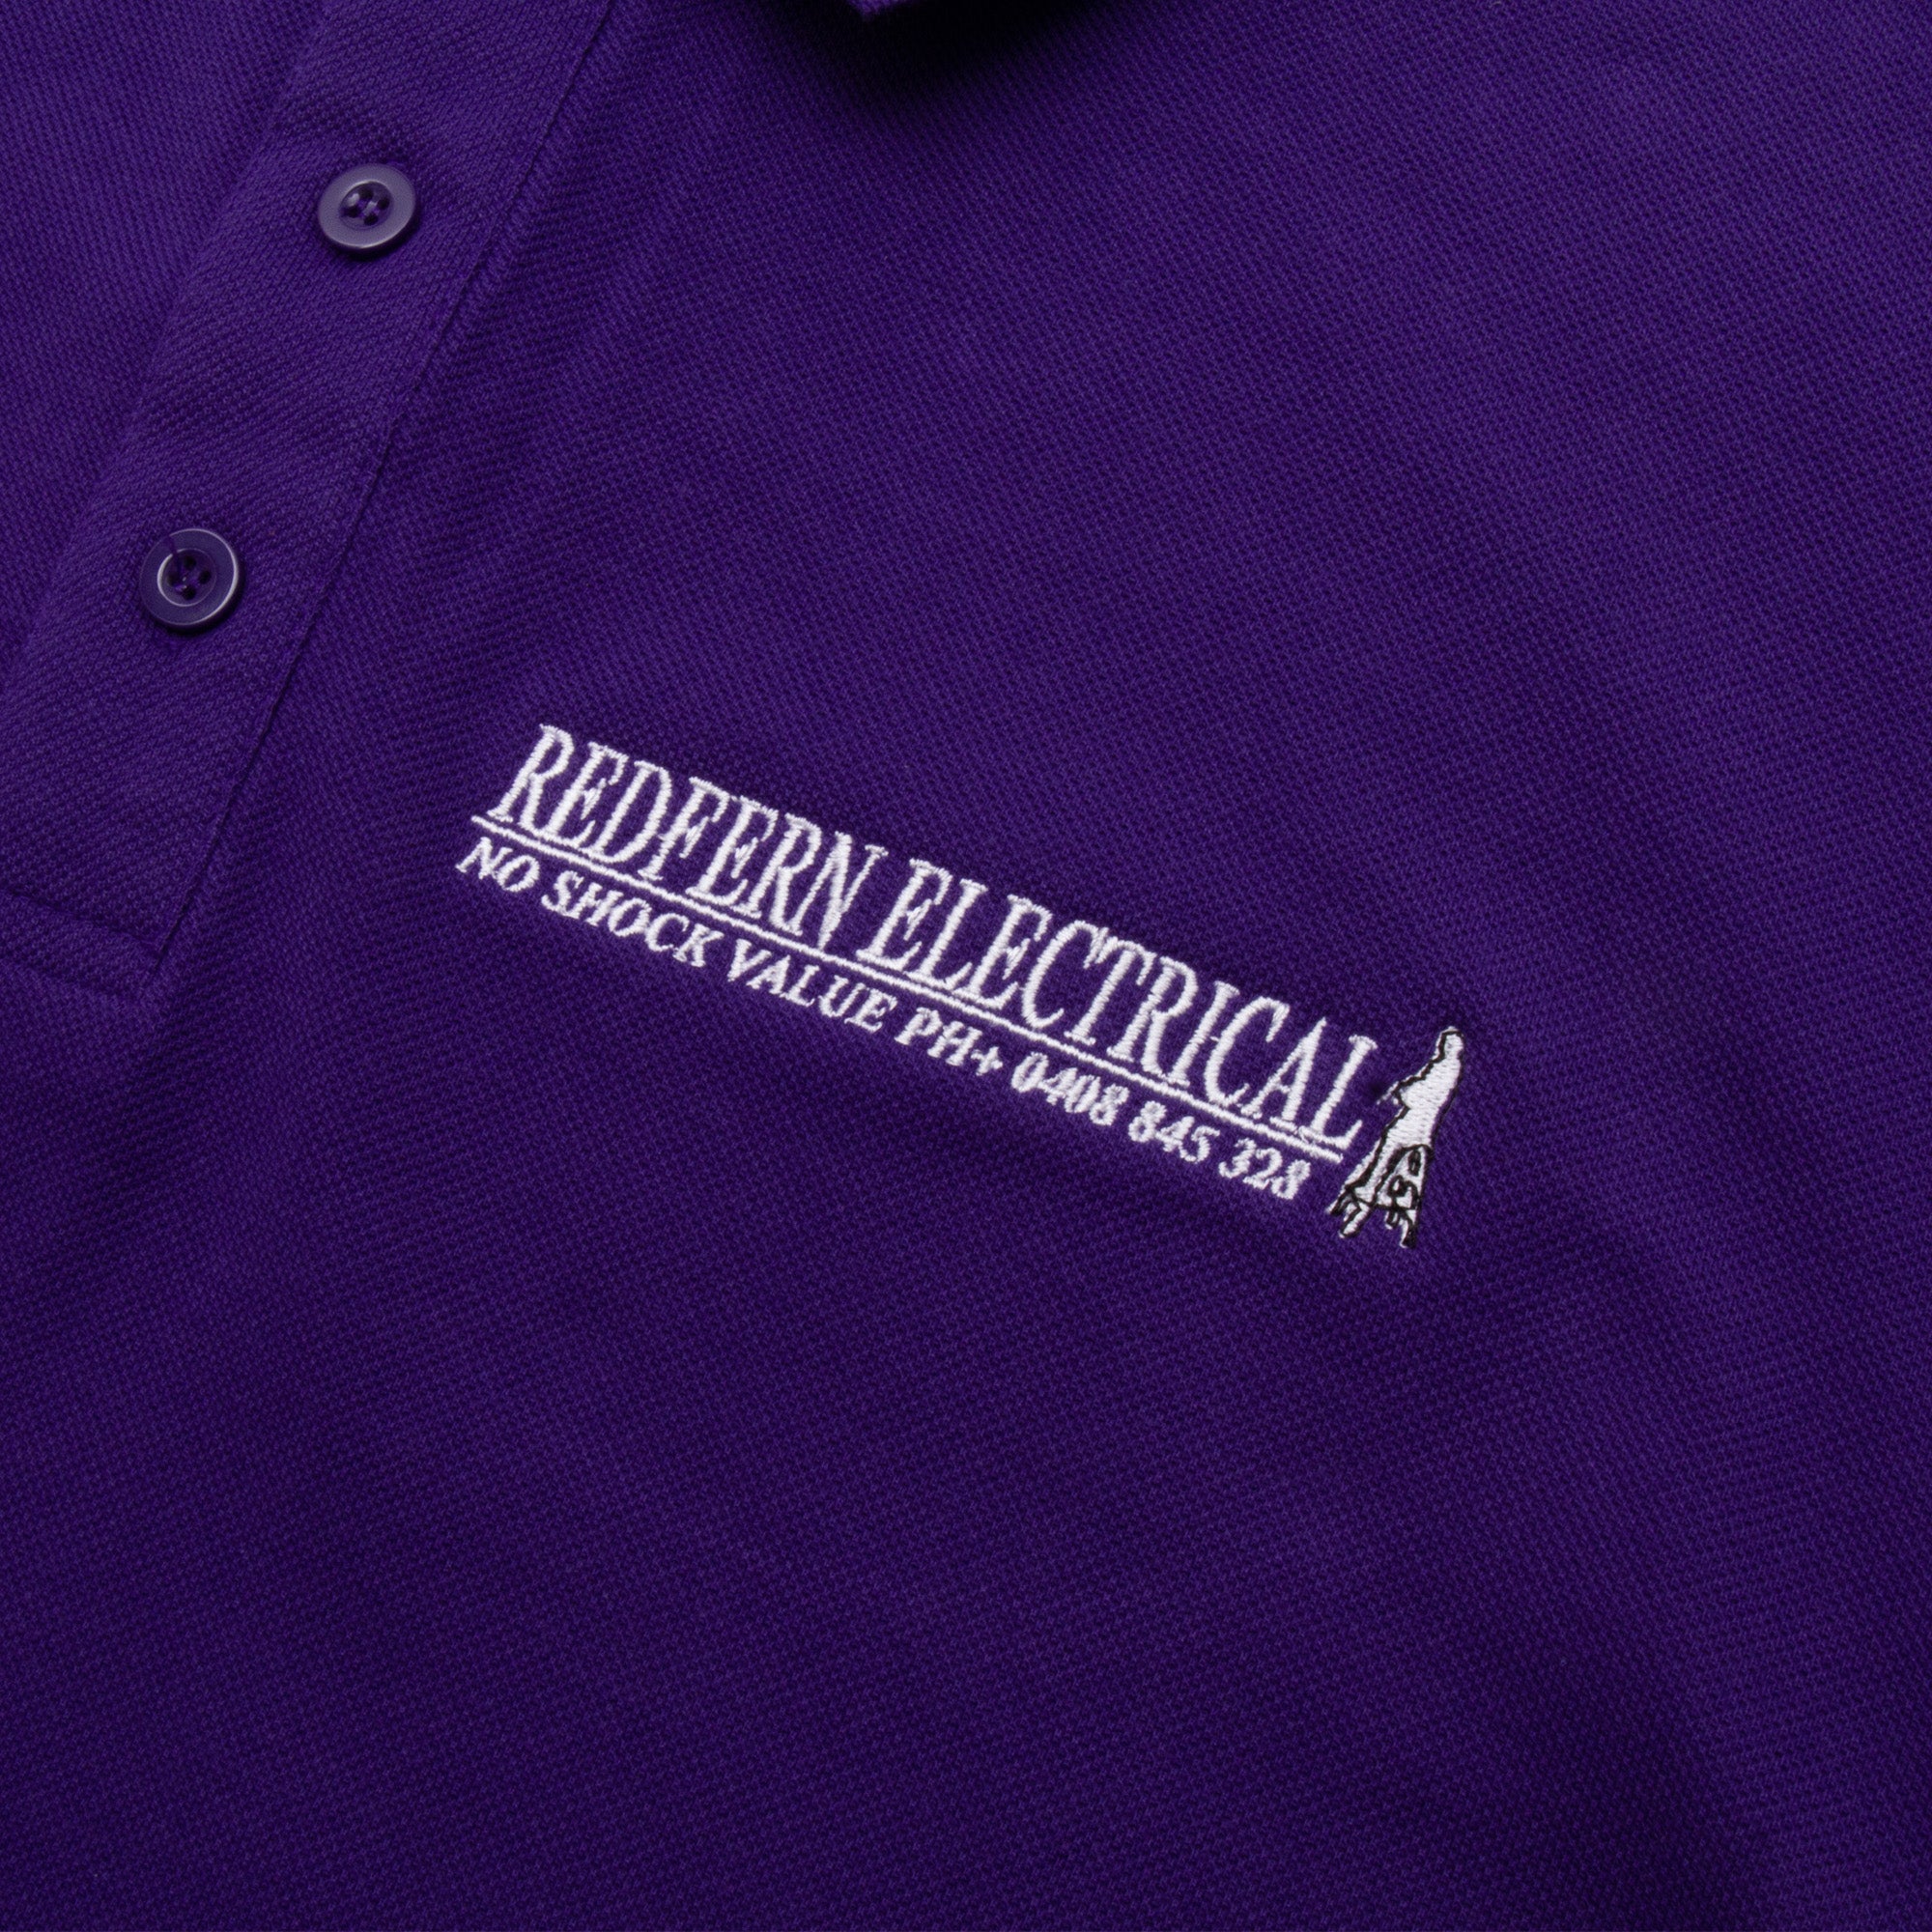 REDFERN ELECTRICAL "LADDER LIFE" POLO PURP